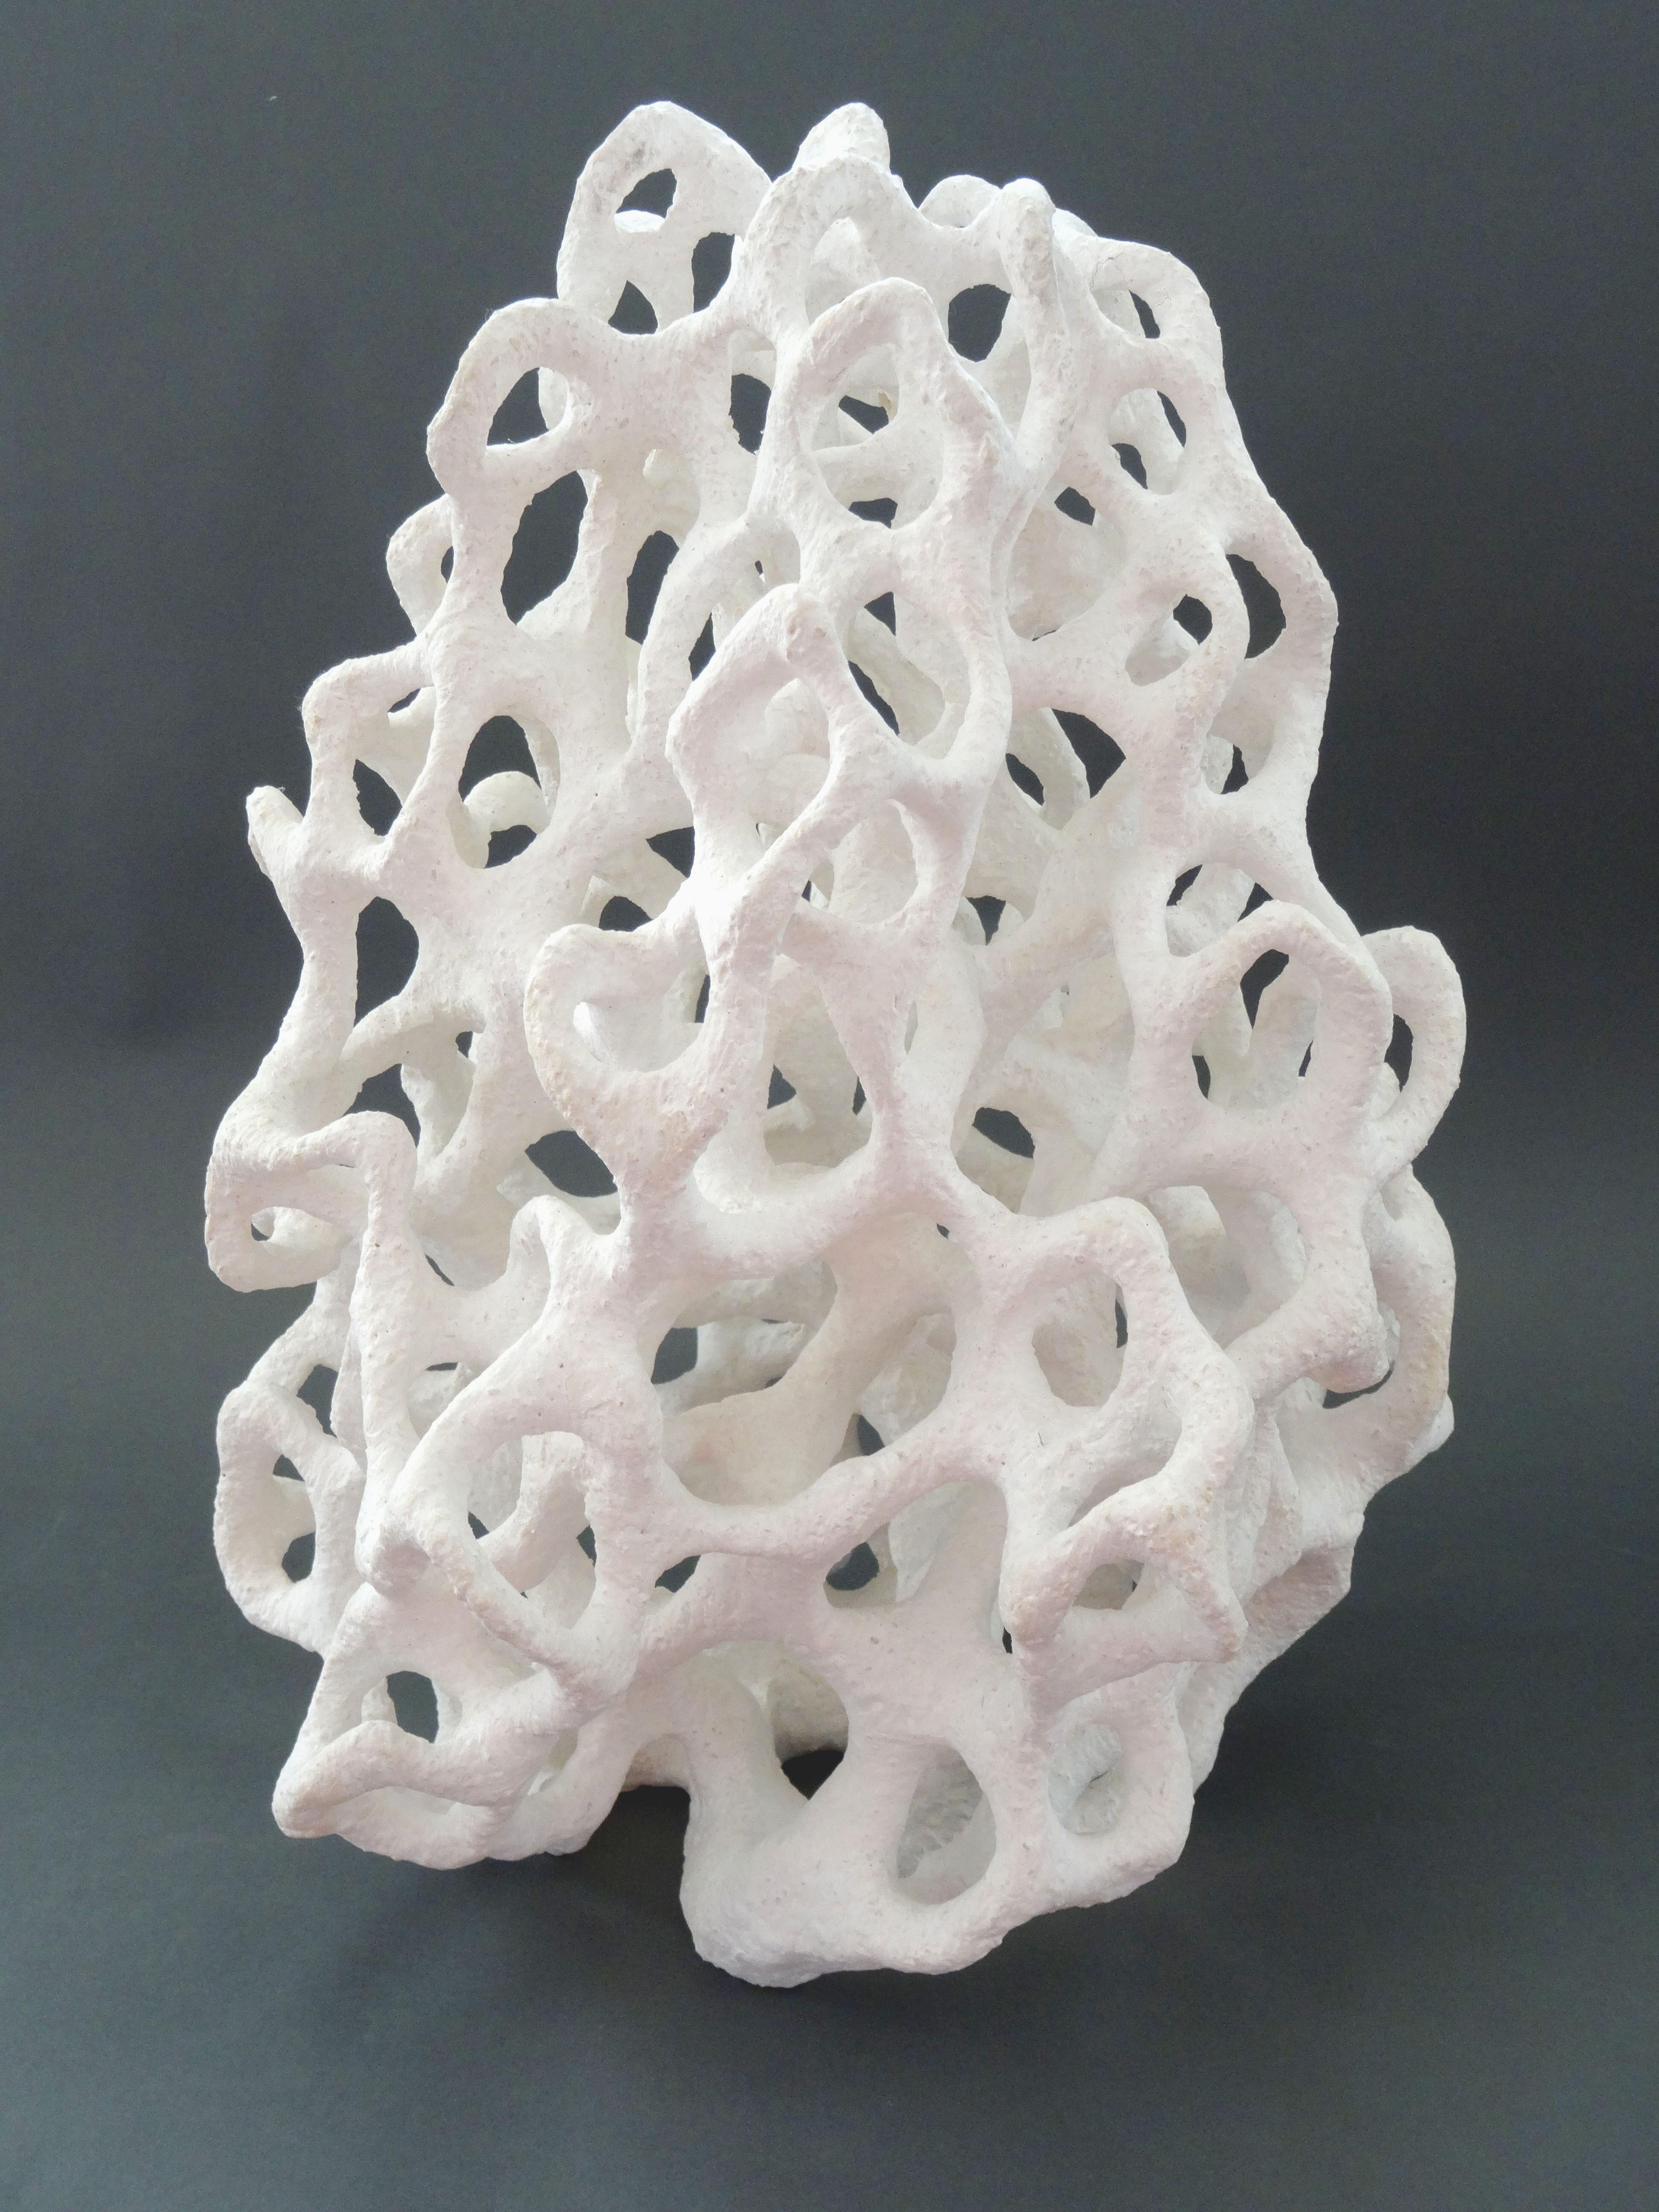 Elina Titane  Abstract Sculpture - Infinity loops. Ceramics and porcelain, h 35 cm; W 27 cm; D 25 cm